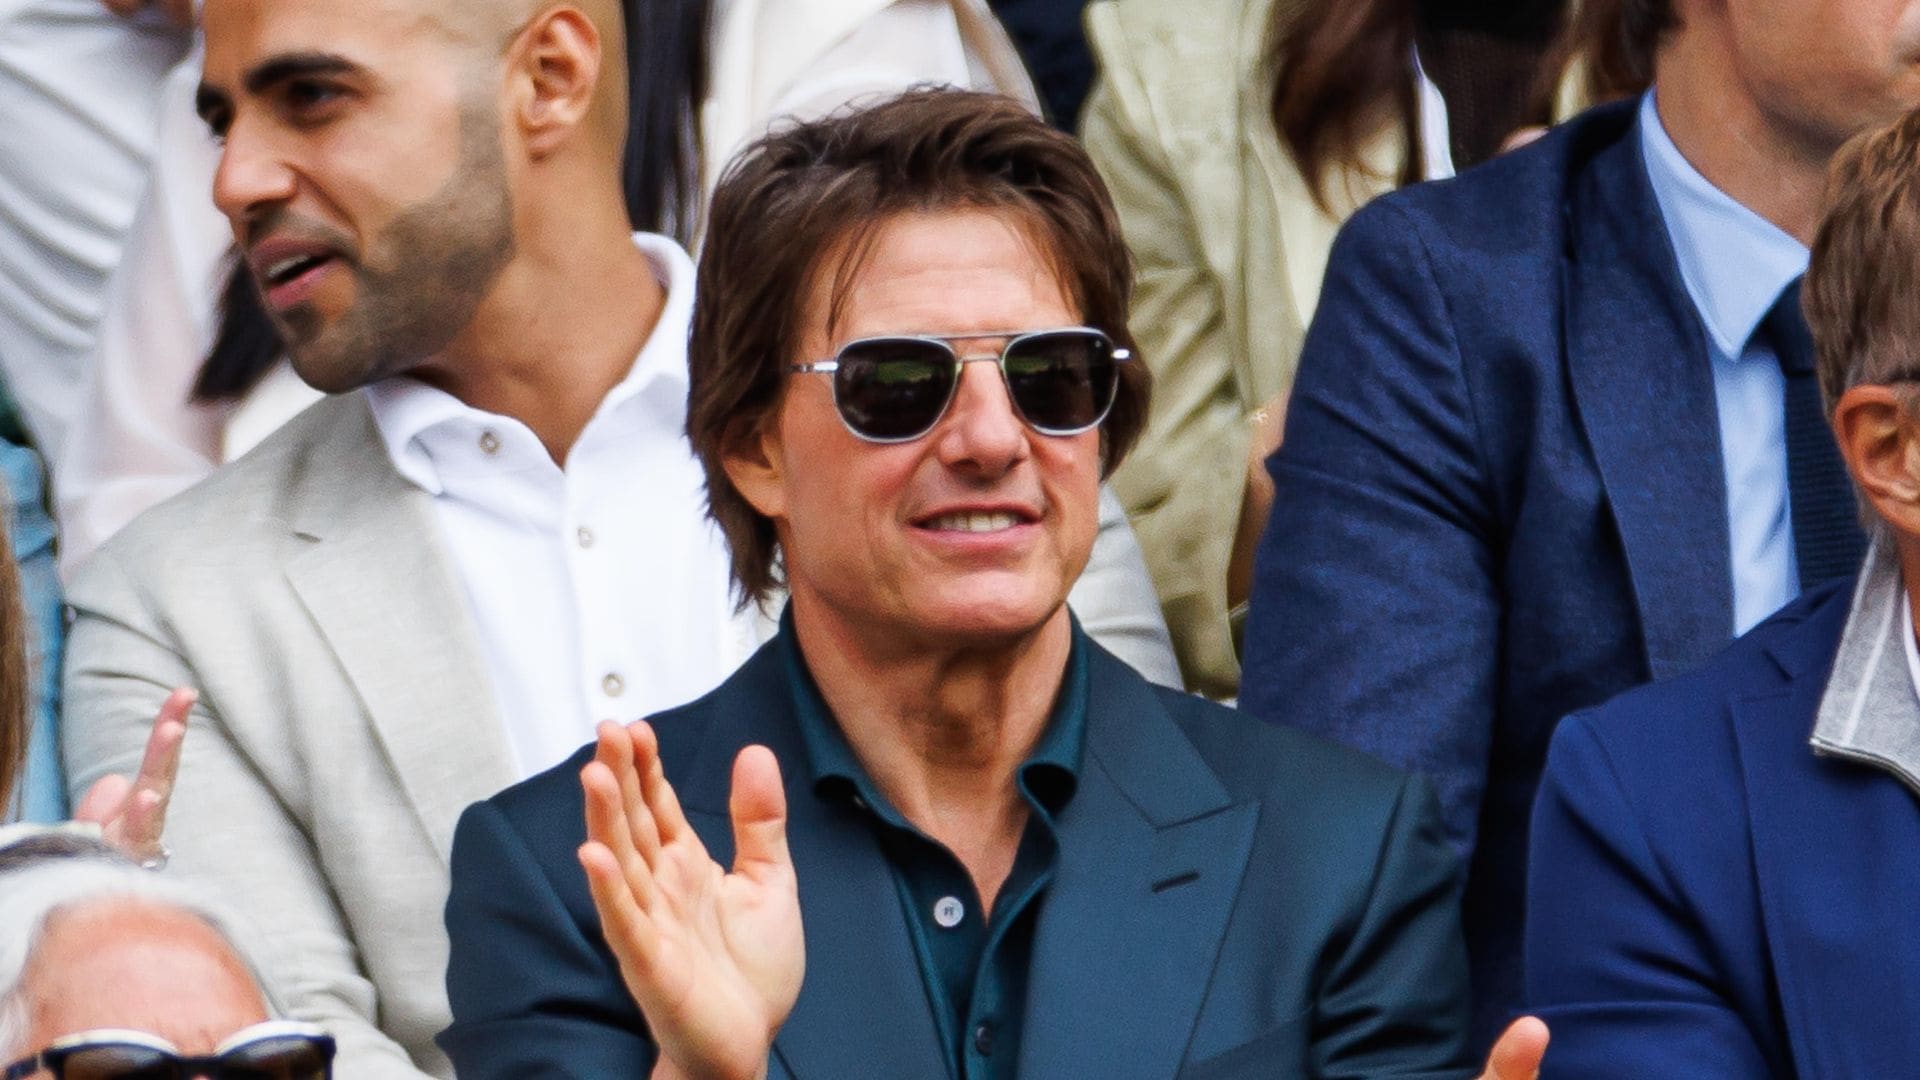 Tom Cruise to perform an epic stunt at closing ceremony of the Paris Olympics